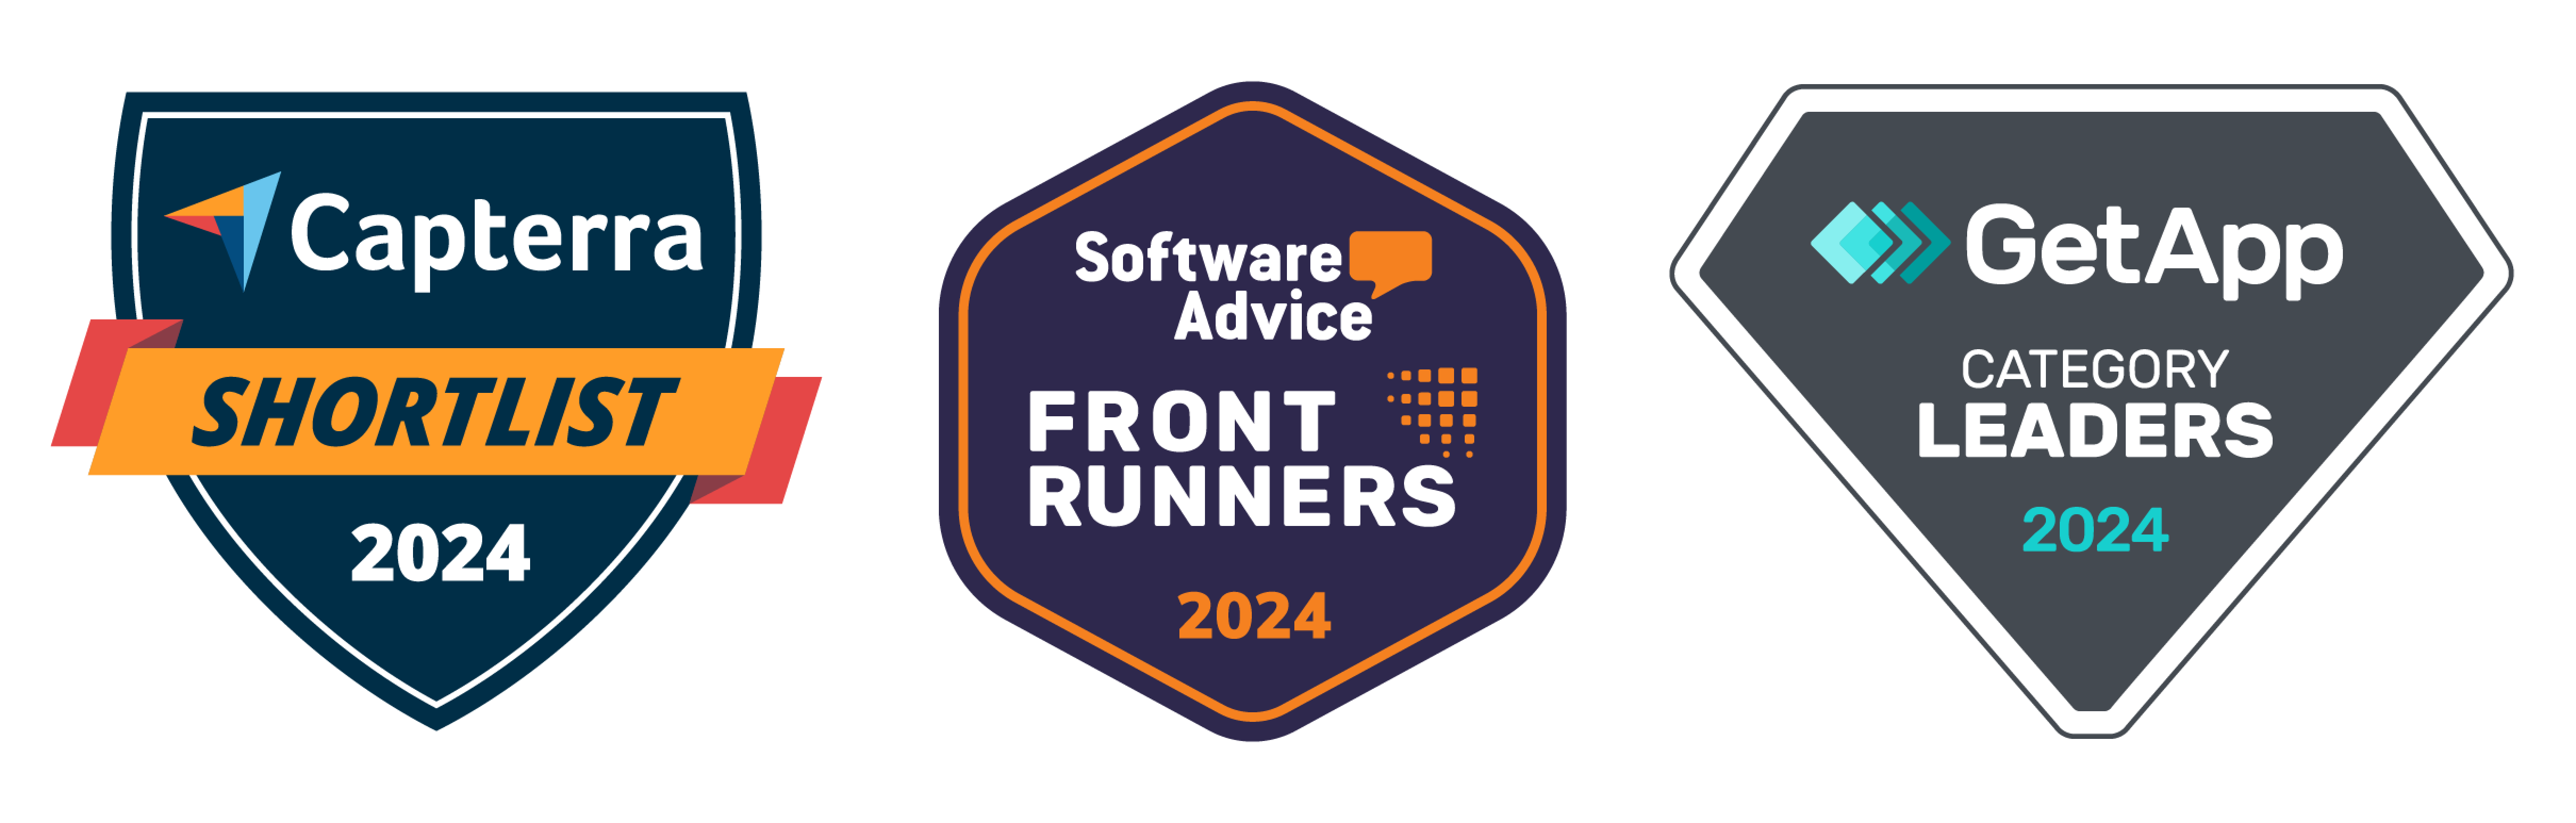 OpenProject recognized as top project management software in 2024 by Gartner Digital Markets